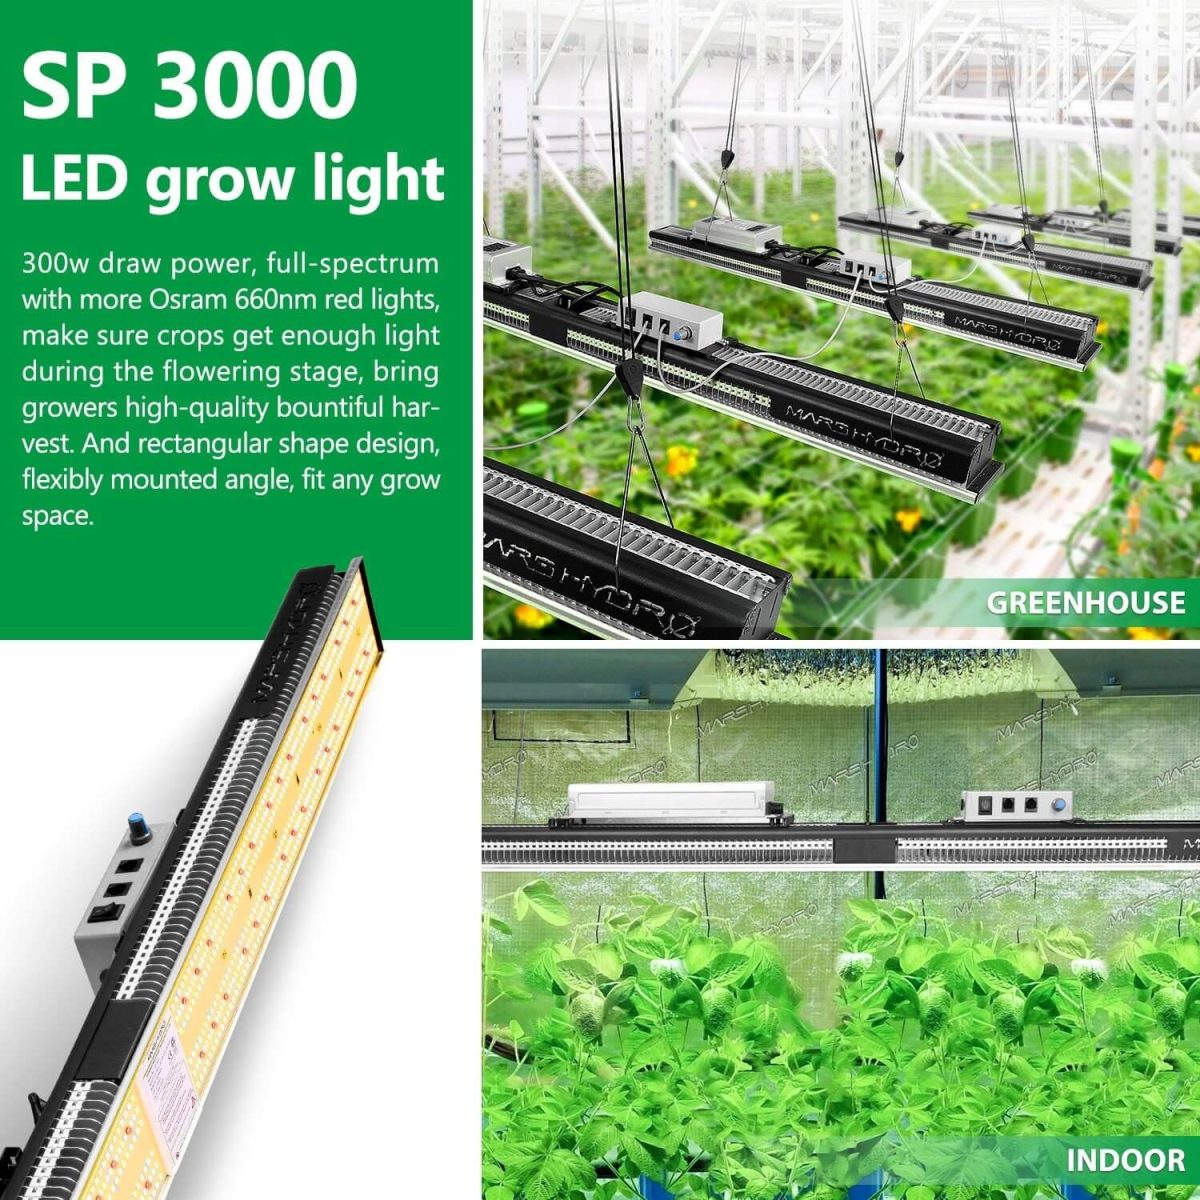 300W LED grow light, SP 3000 is ideal for greenhouse or indoor tent to bring bountiful harvest